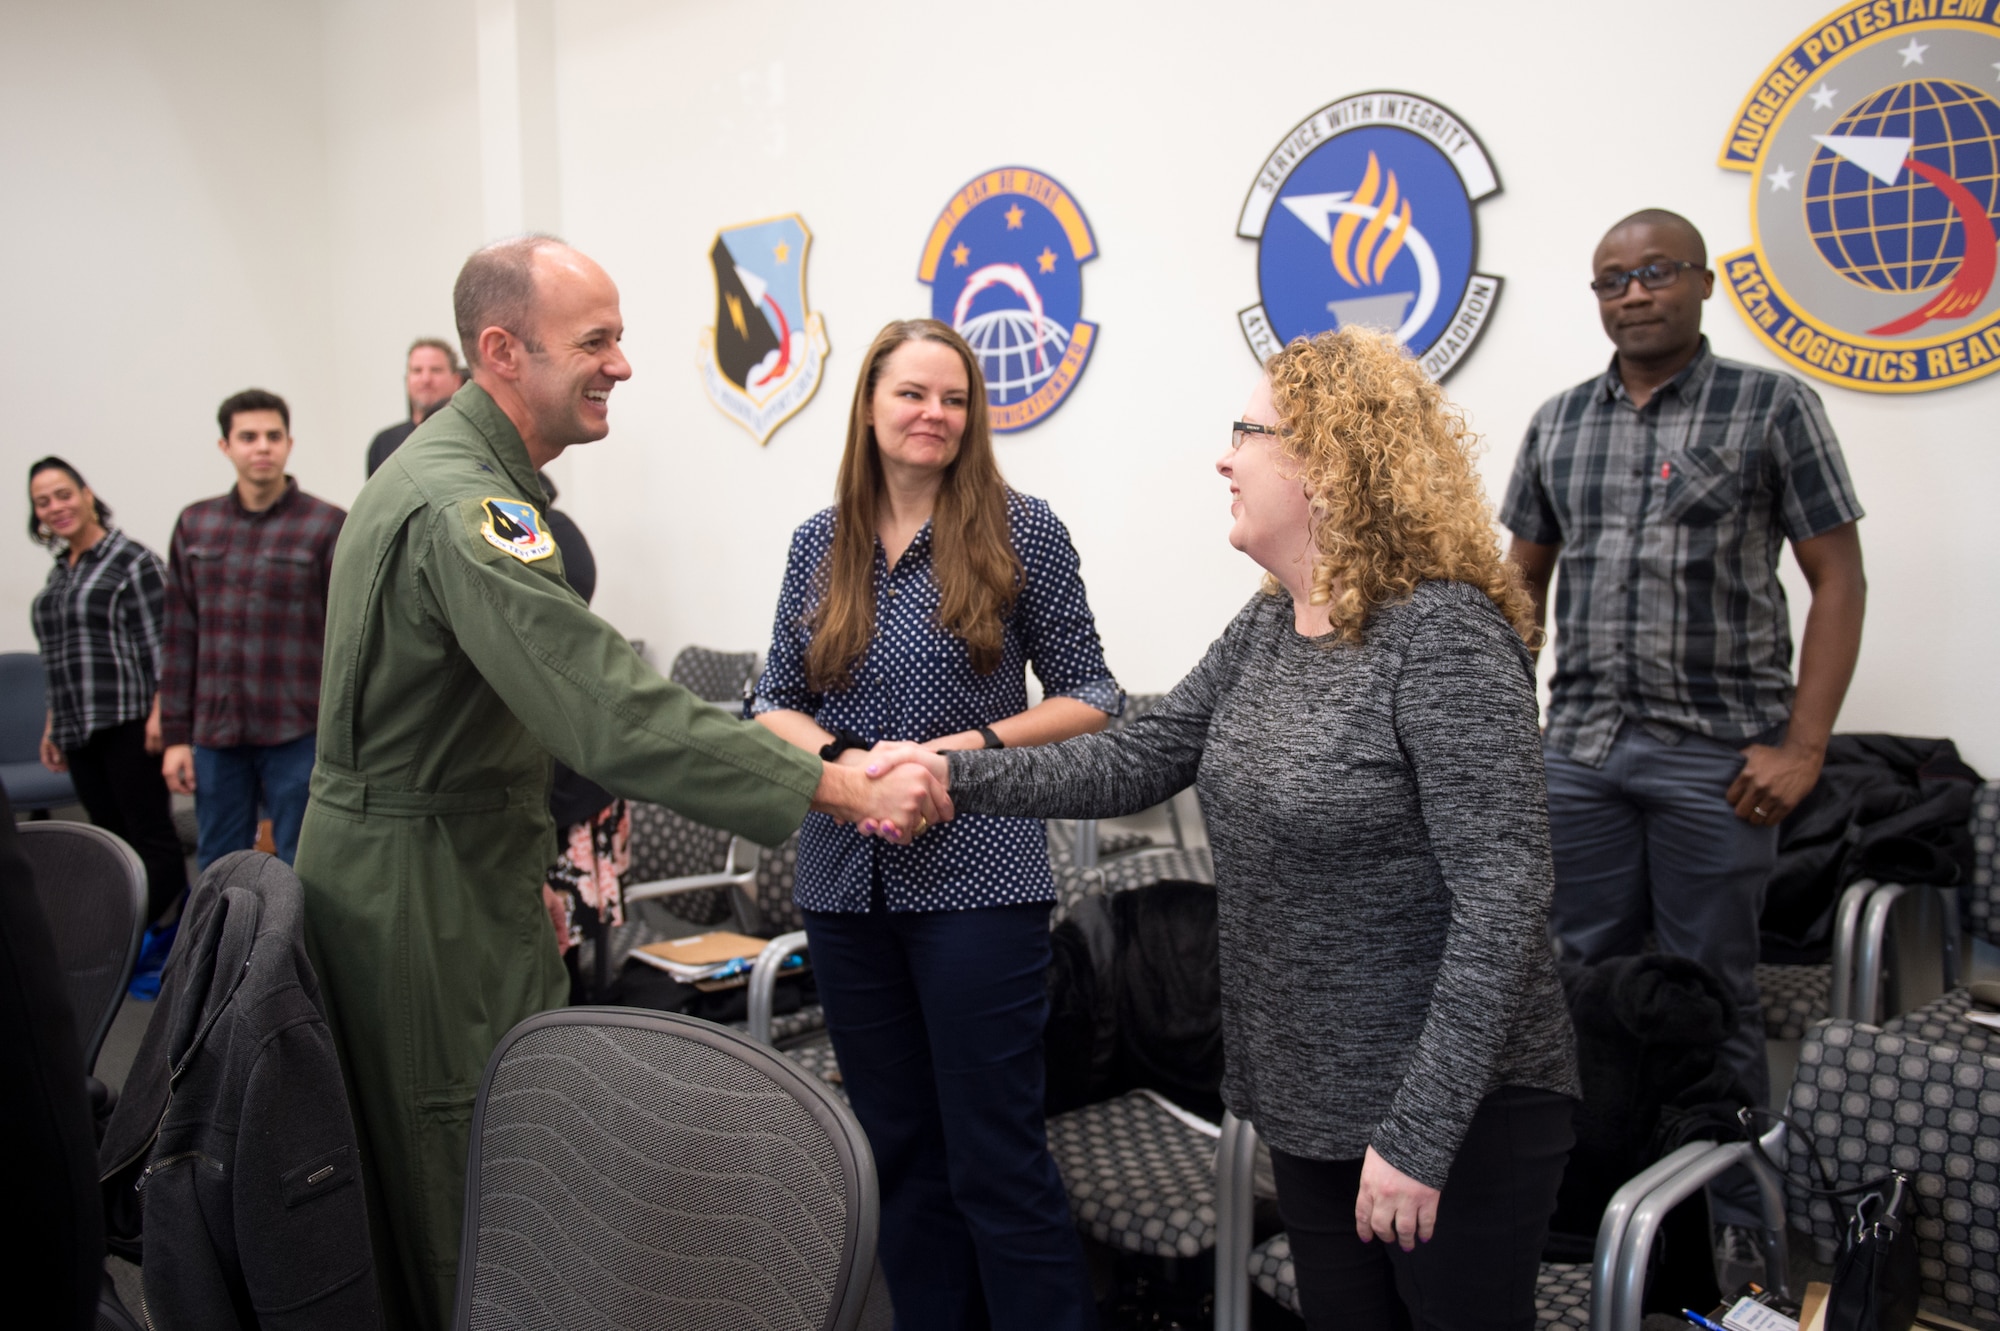 Brig. Gen. E. John Teichert, 412th Test Wing Commander, welcomes newly-hired Air Force Civilian, Joy Stanton to Team Edwards during a civilian new employee orientation event at Edwards Air Force Base, California, Jan. 6, 2020. (U.S. Air Force photo by Richard Gonzales)